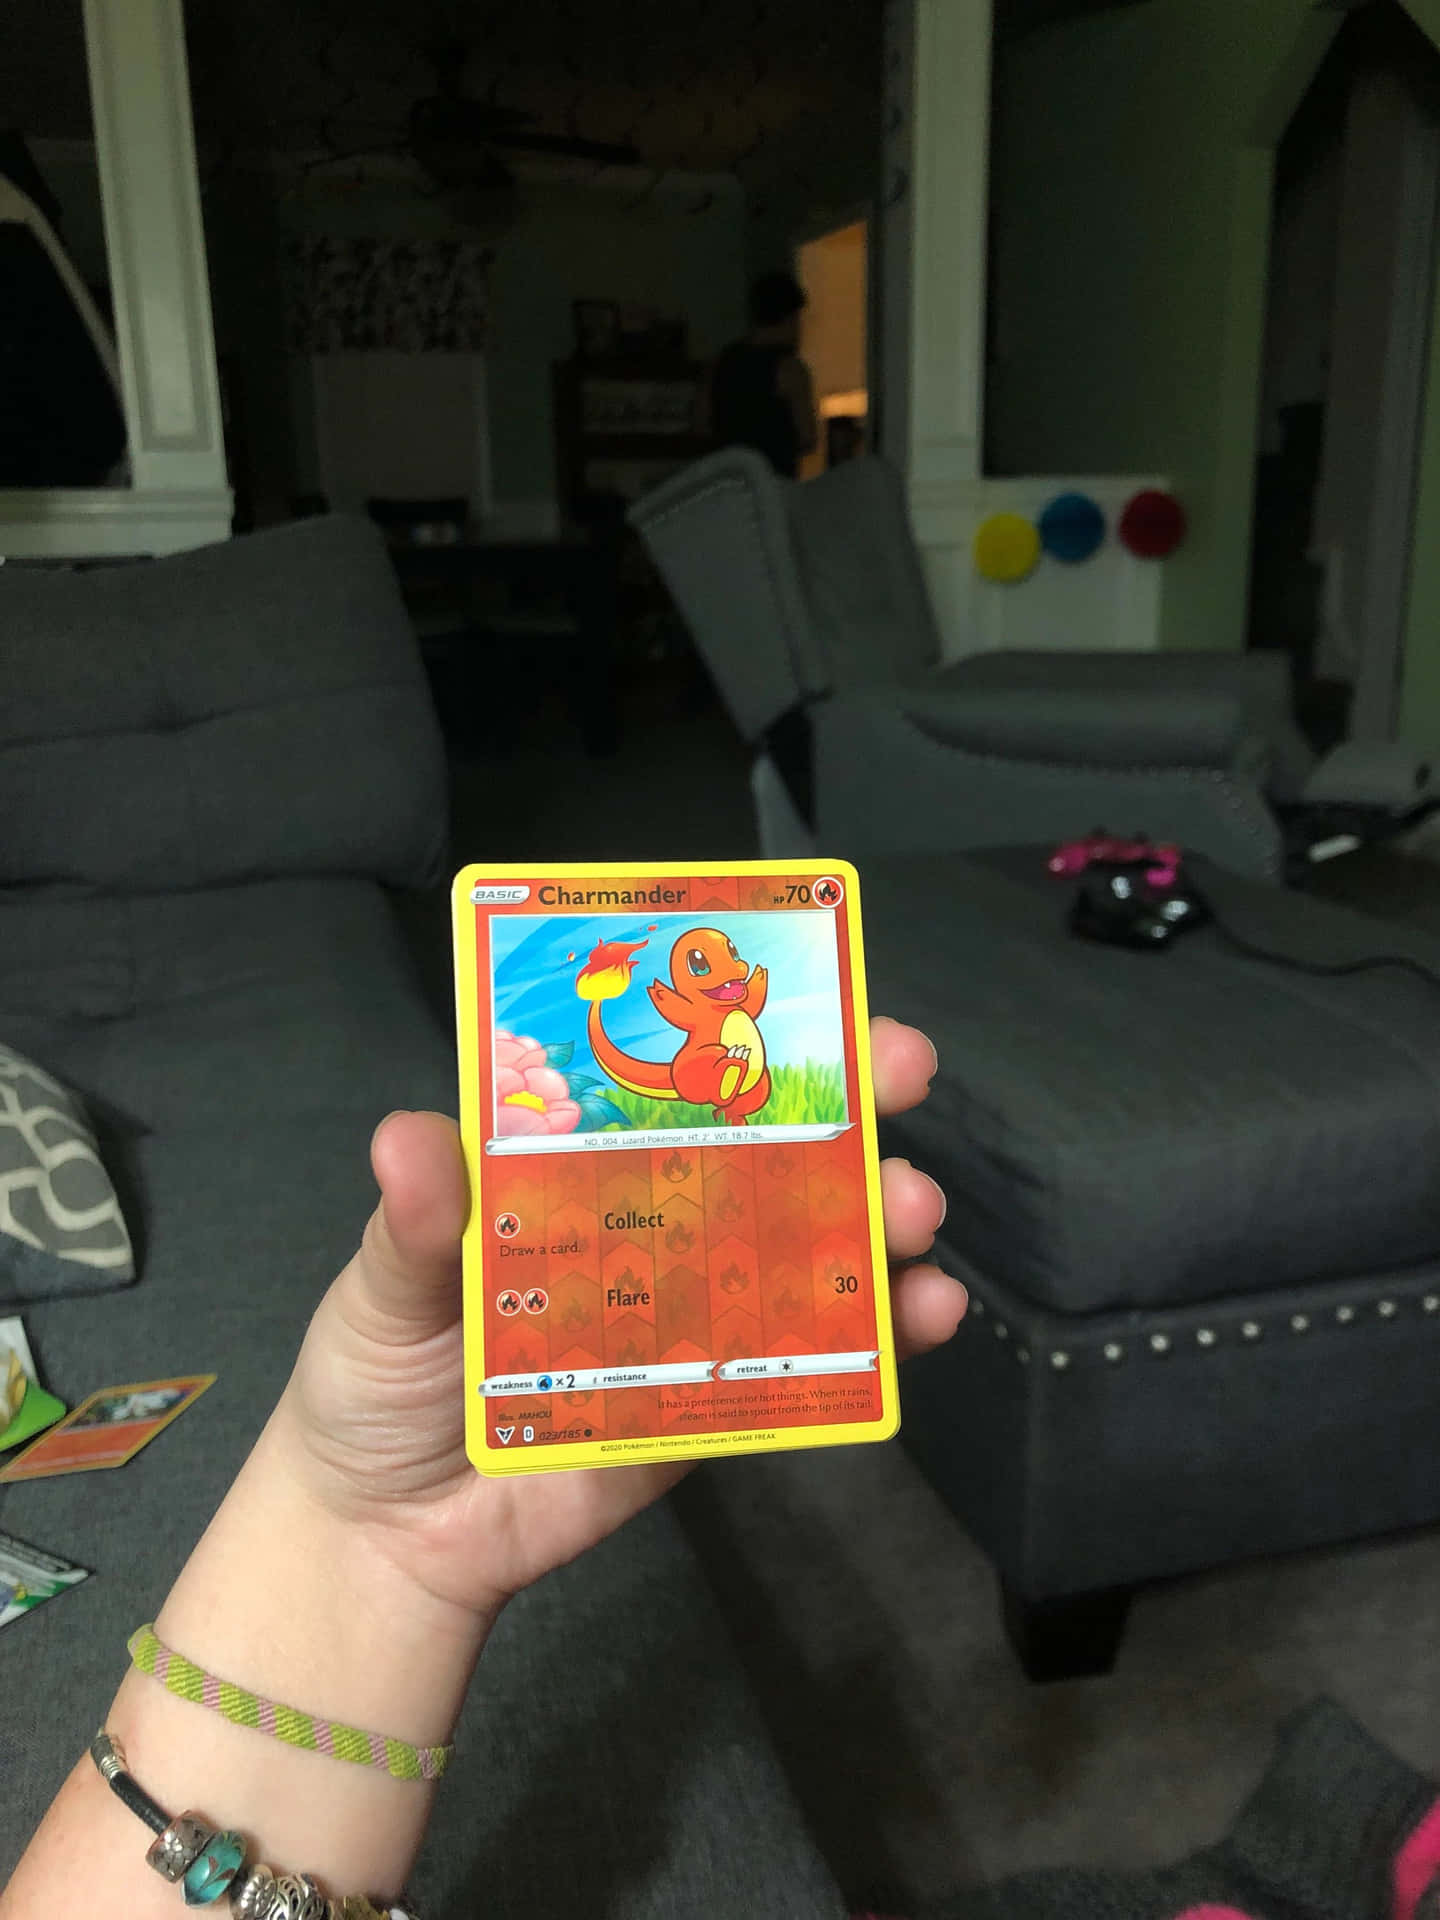 "A vivid collection of colorful Pokemon cards."